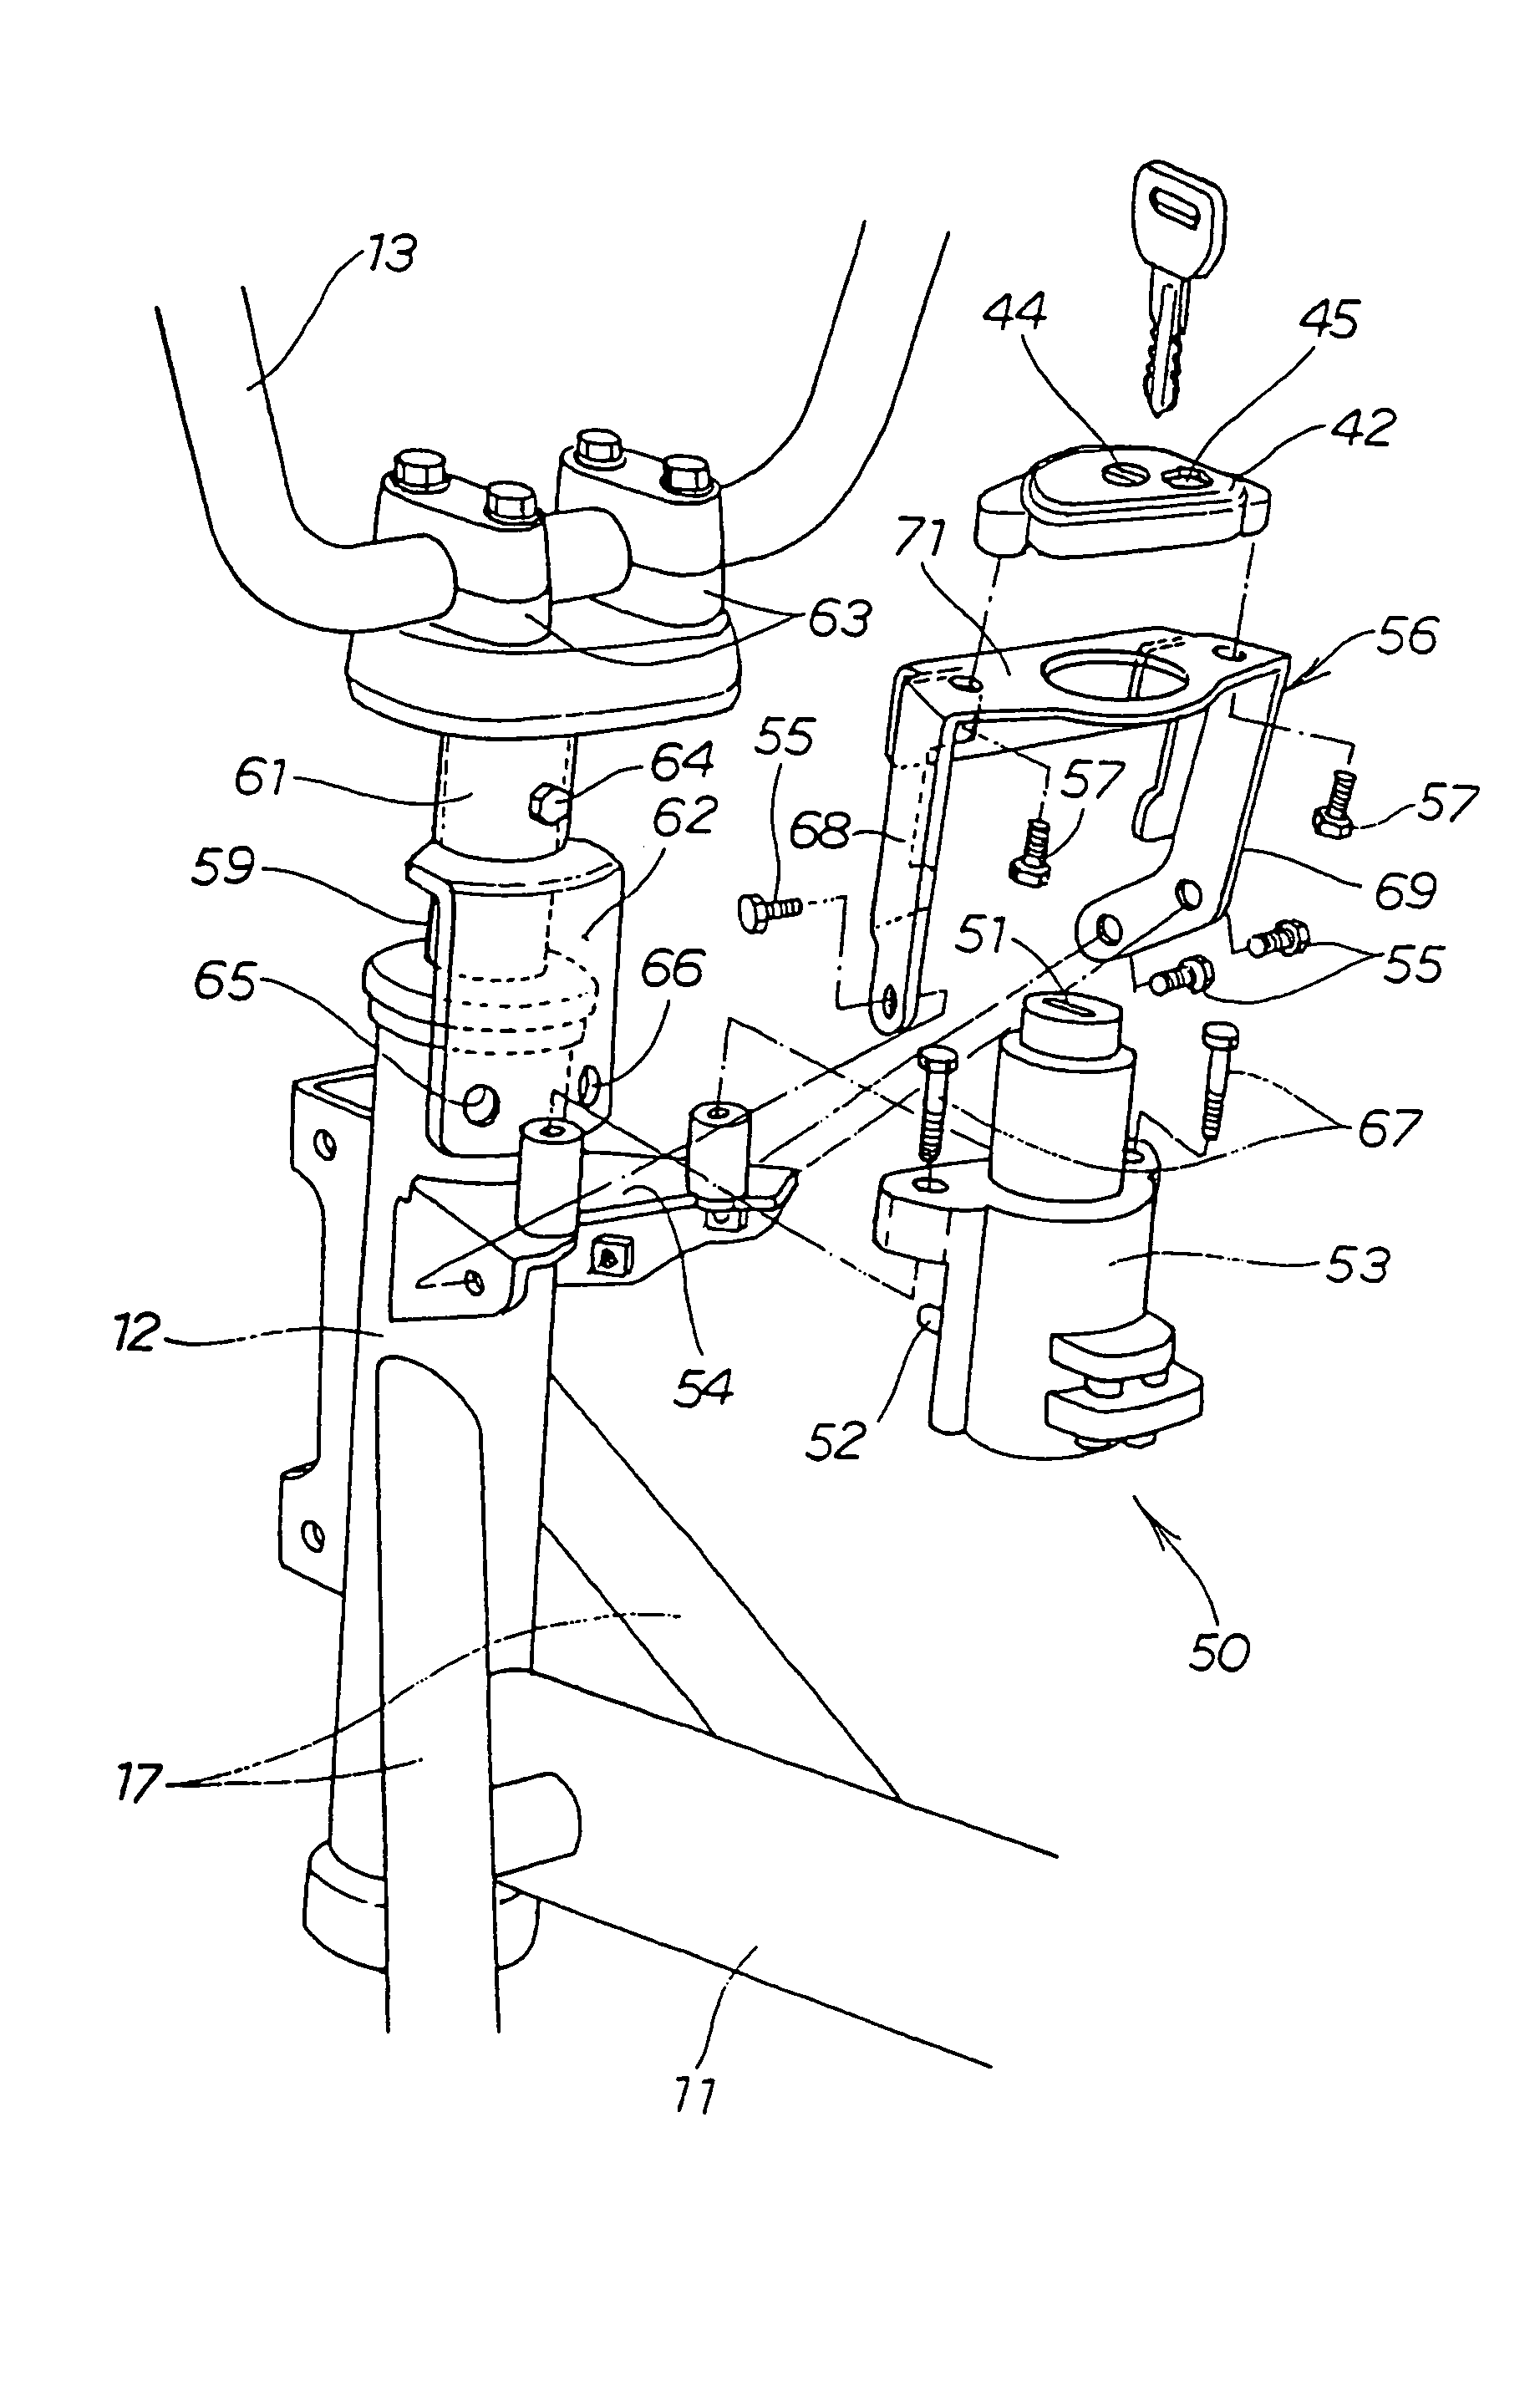 Vehicle provided with key cylinder device equipped with handle lock mechanism